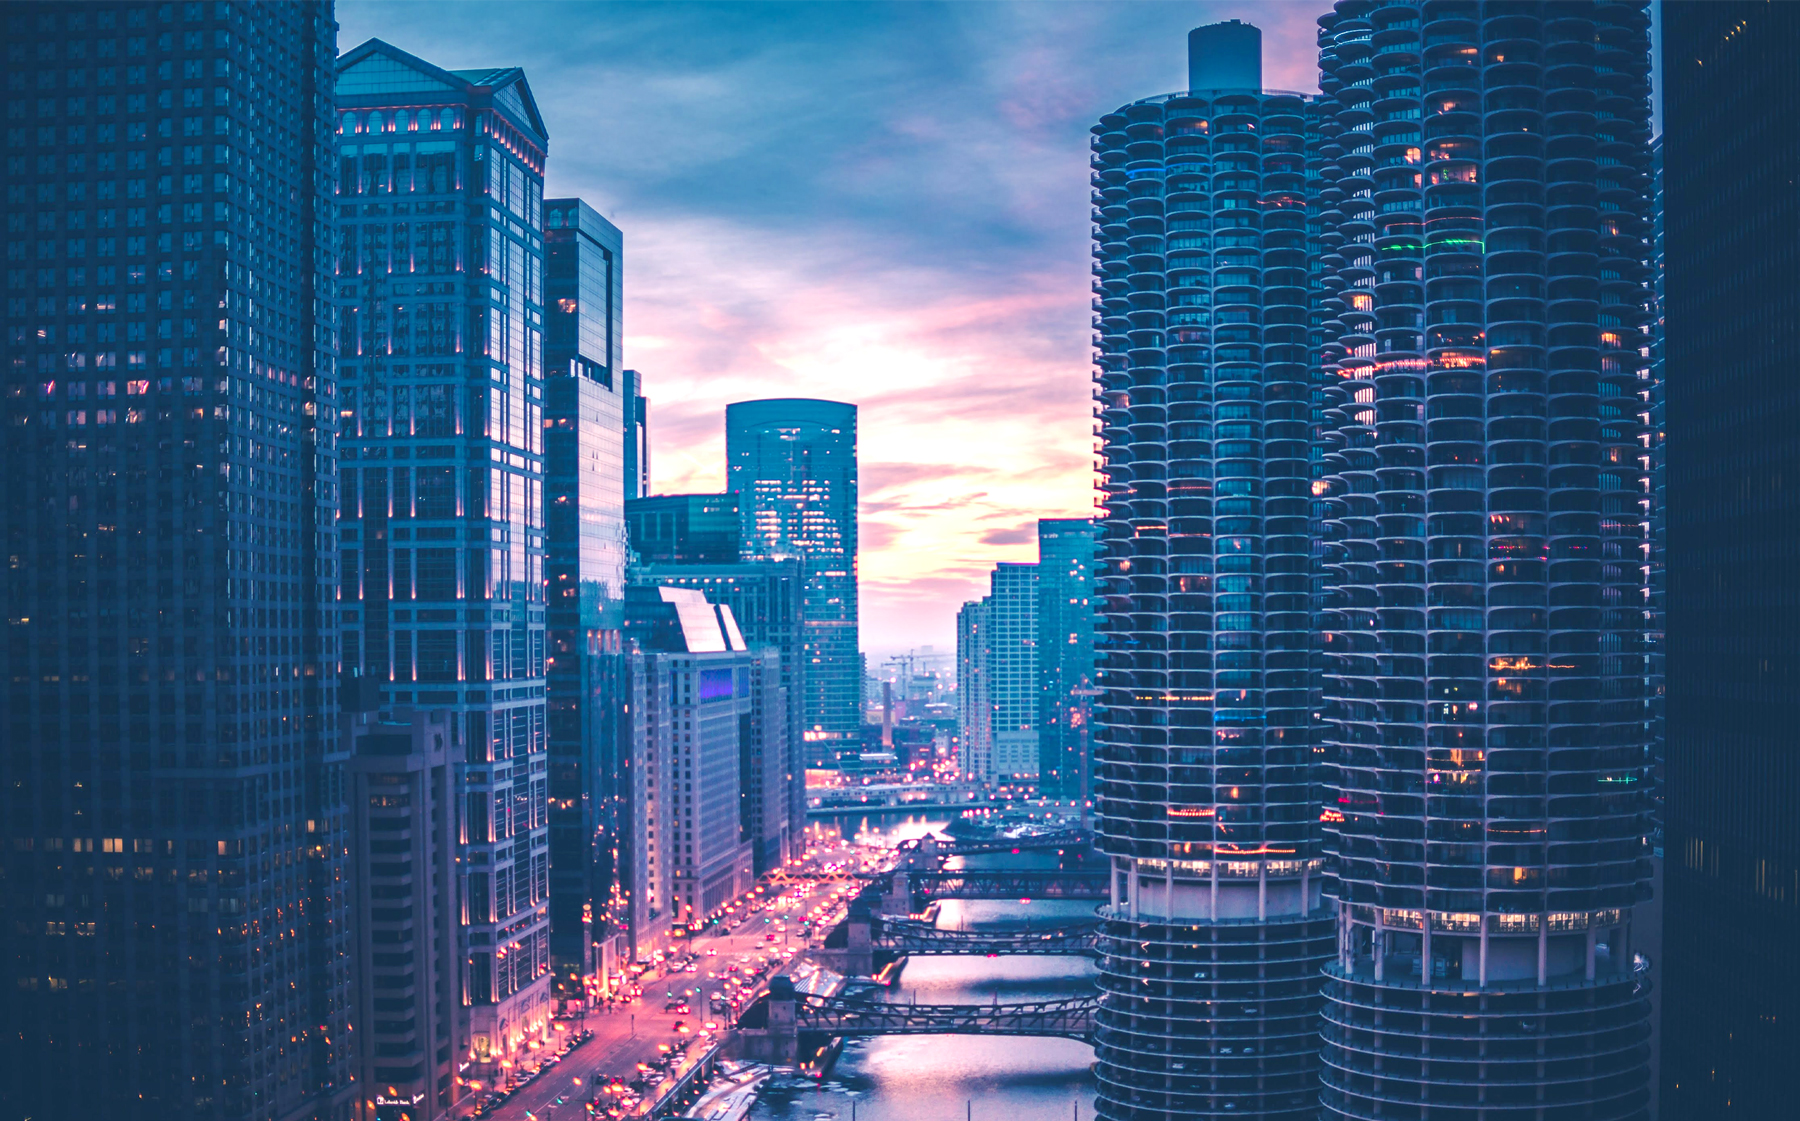 The Chicago office leasing market was strong in the first quarter of 2020, but the good times appear to be over. (Credit: Unsplash)